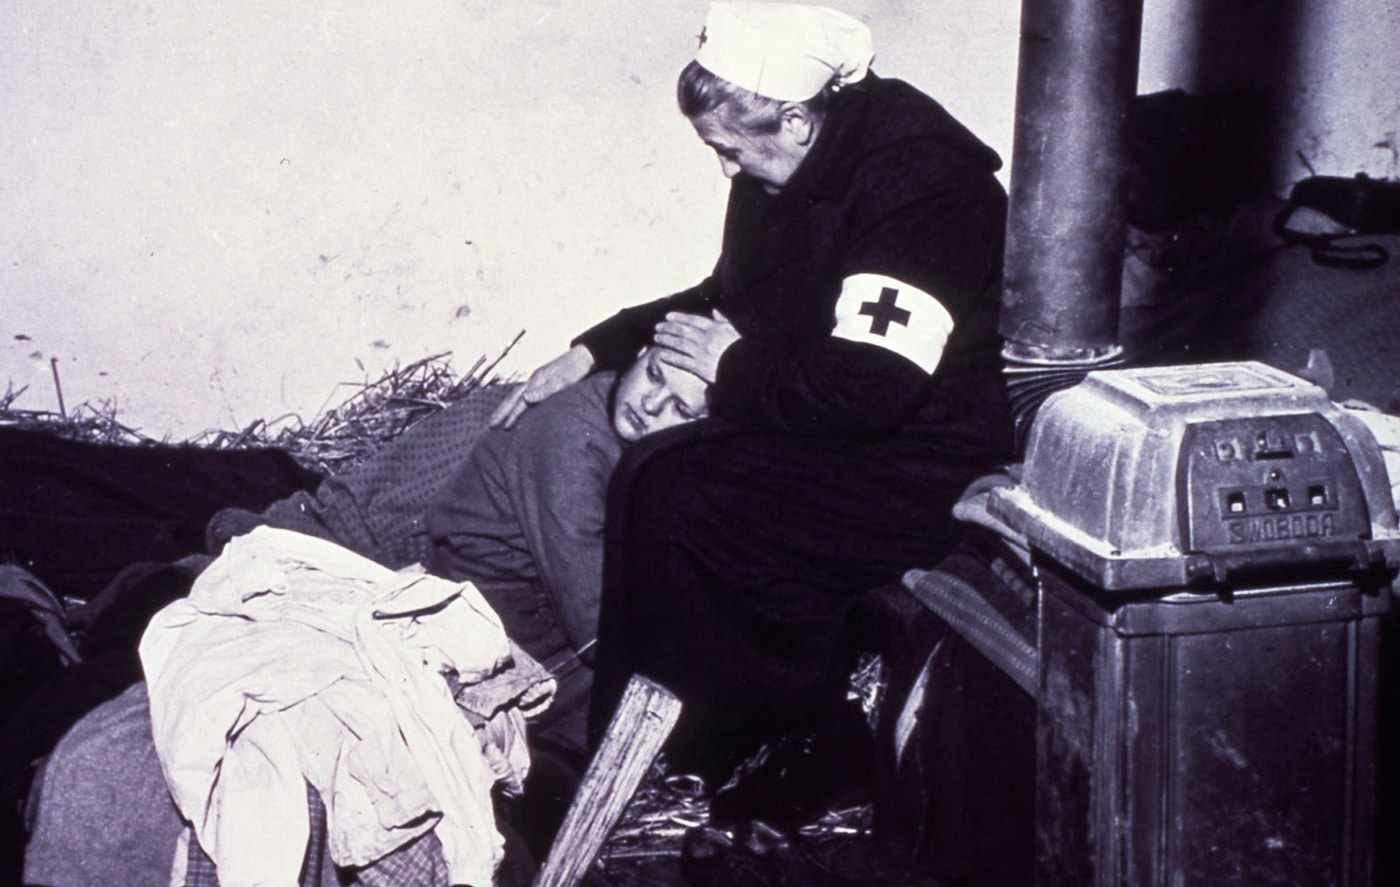 Red Cross worker comforting soldier in WWI